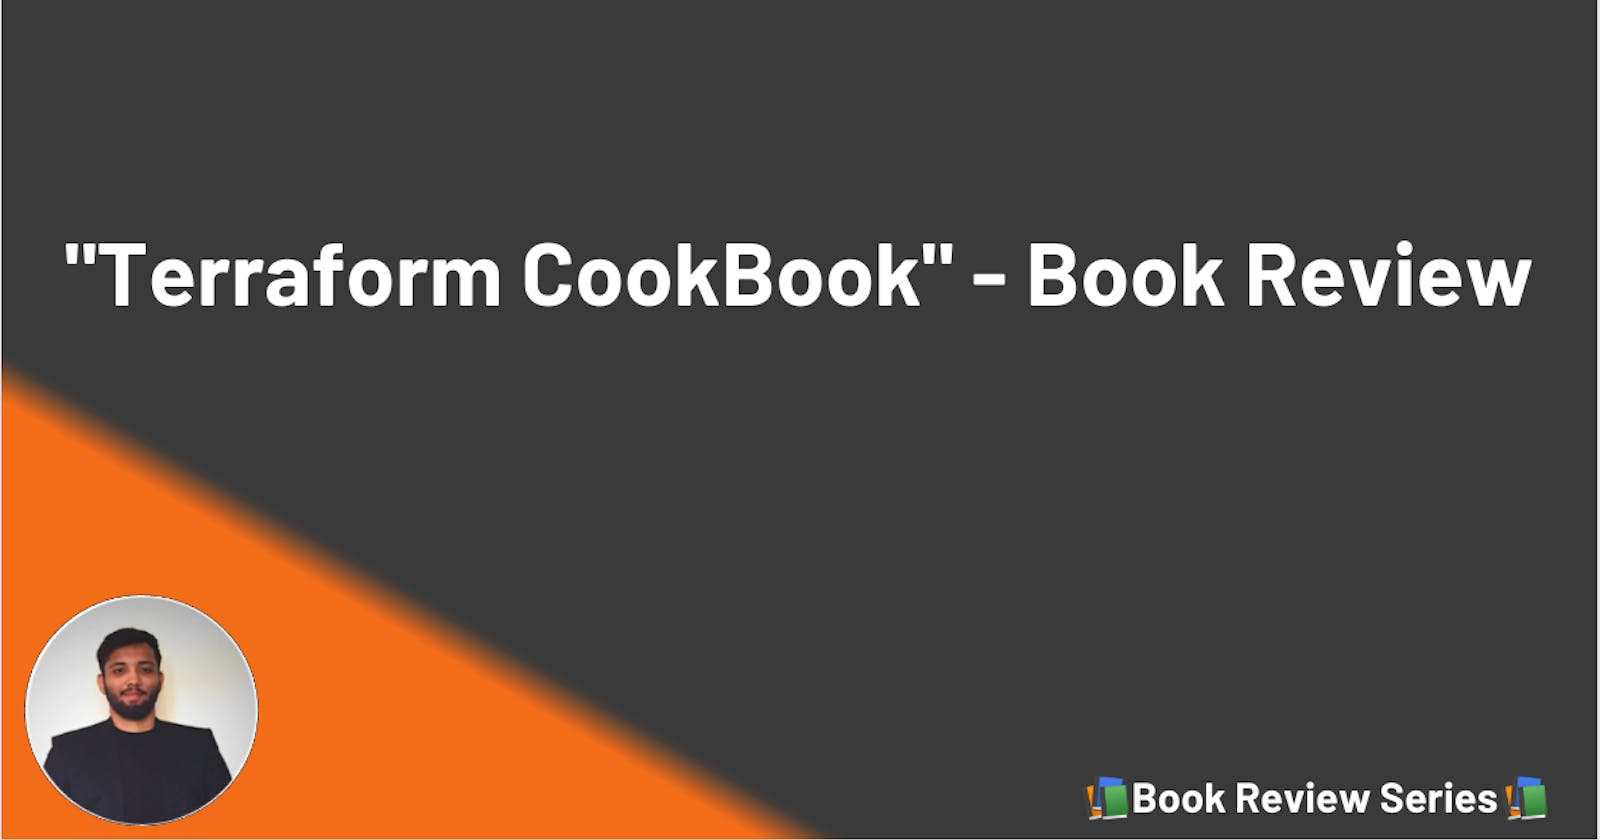 Mastering Cloud Infrastructure Provisioning with the 'Terraform Cookbook' - A Book Review